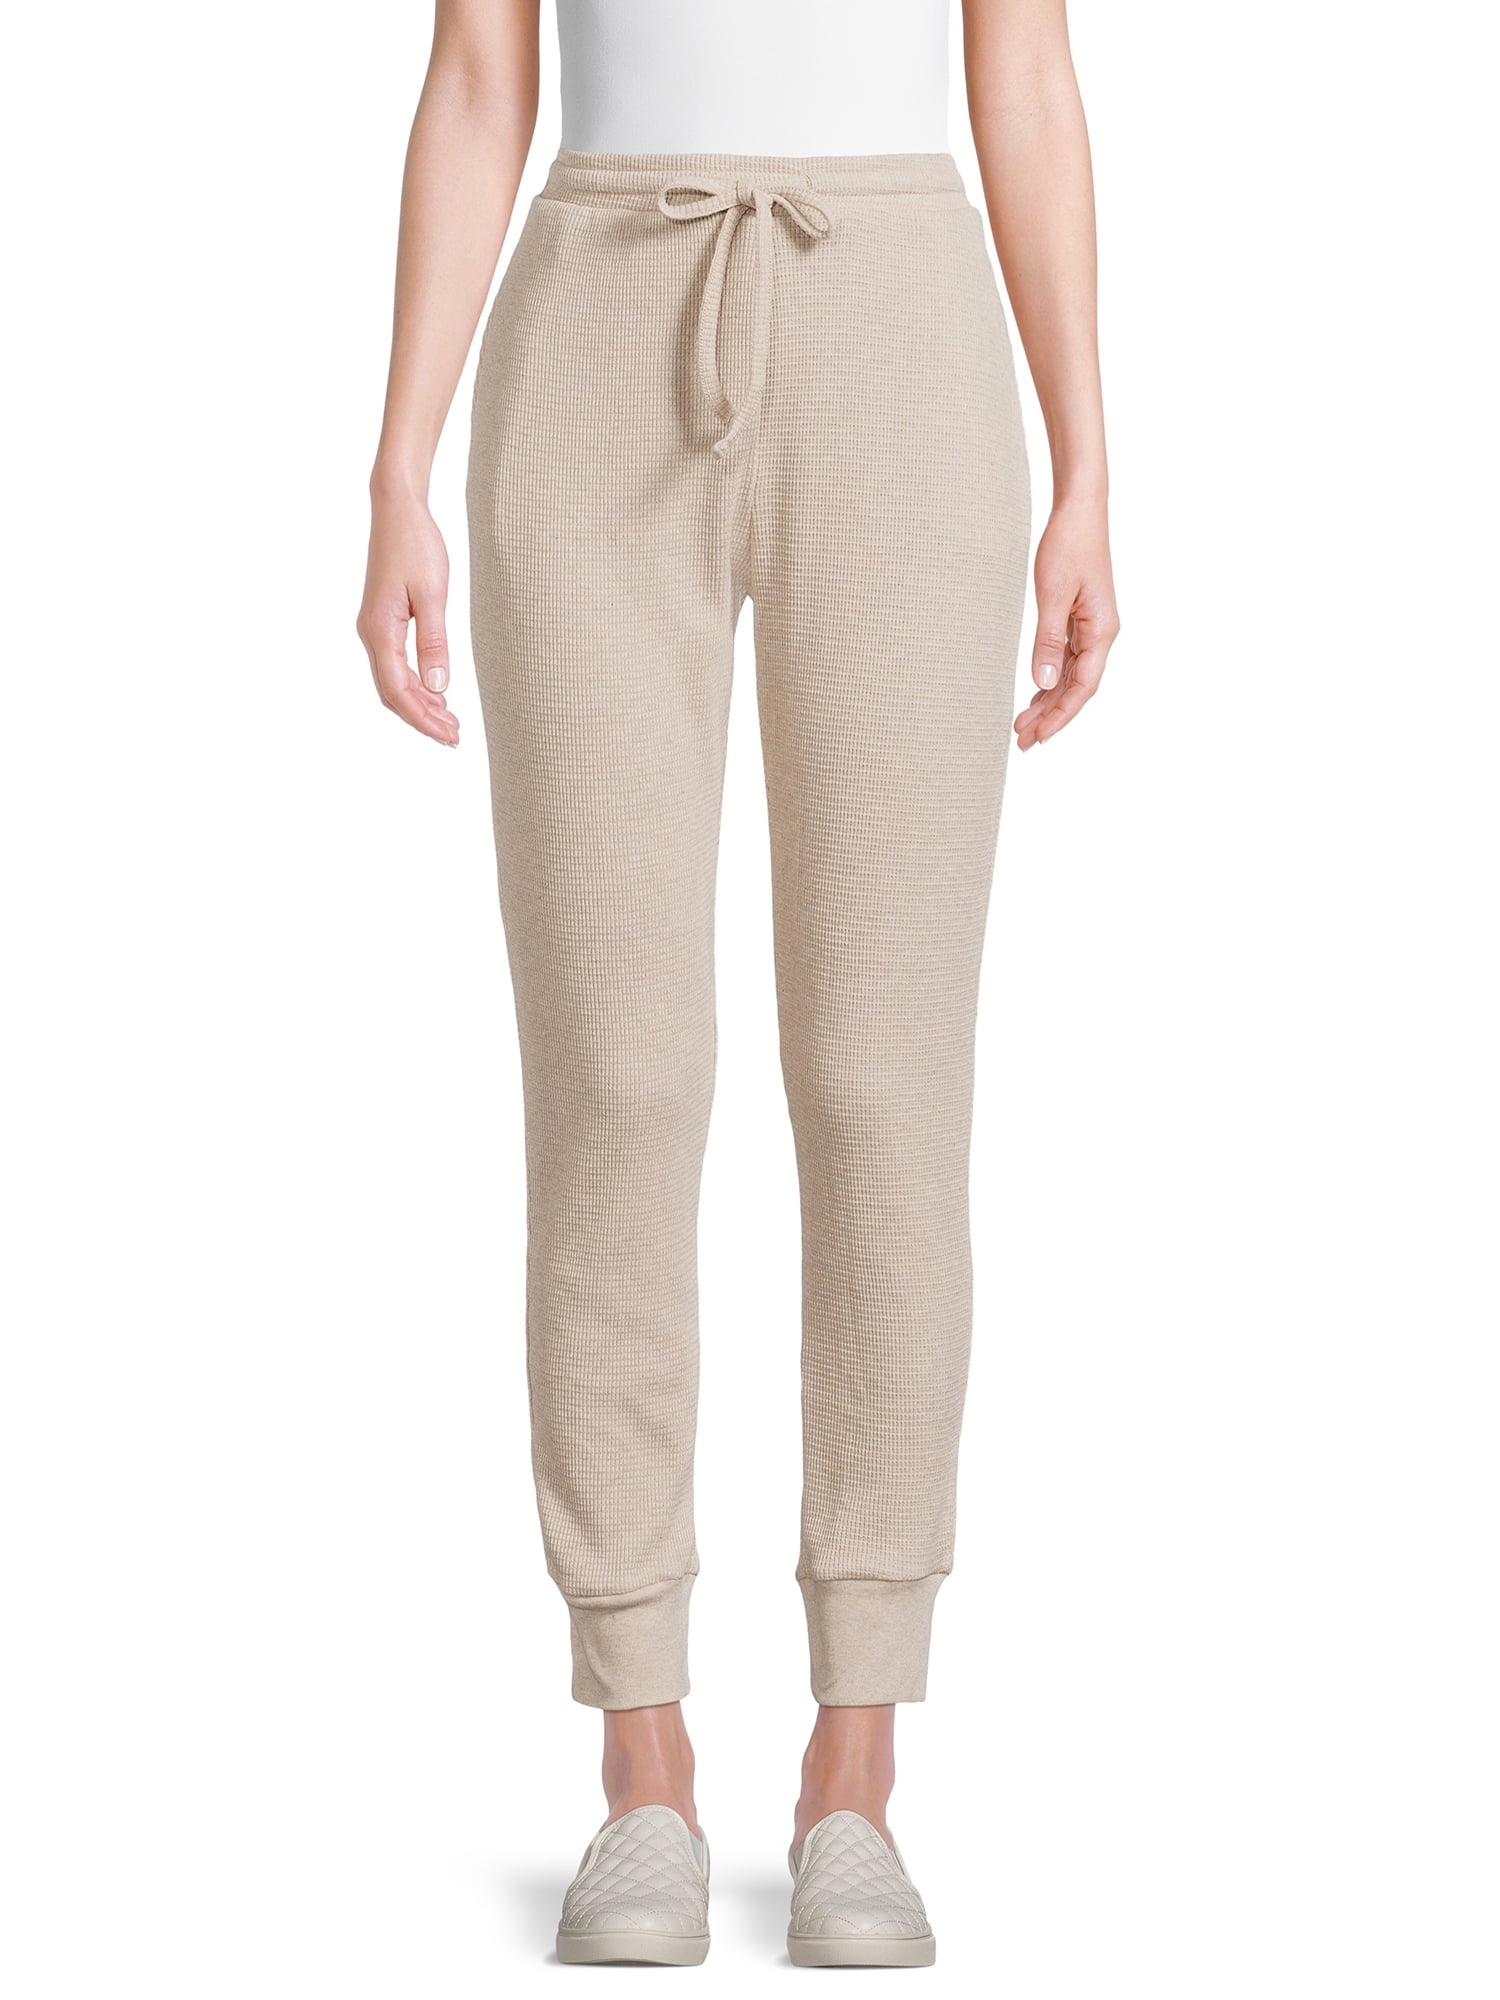 Hanes Women's Relaxed Fit Waffle Knit Thermal Jogger Pants 